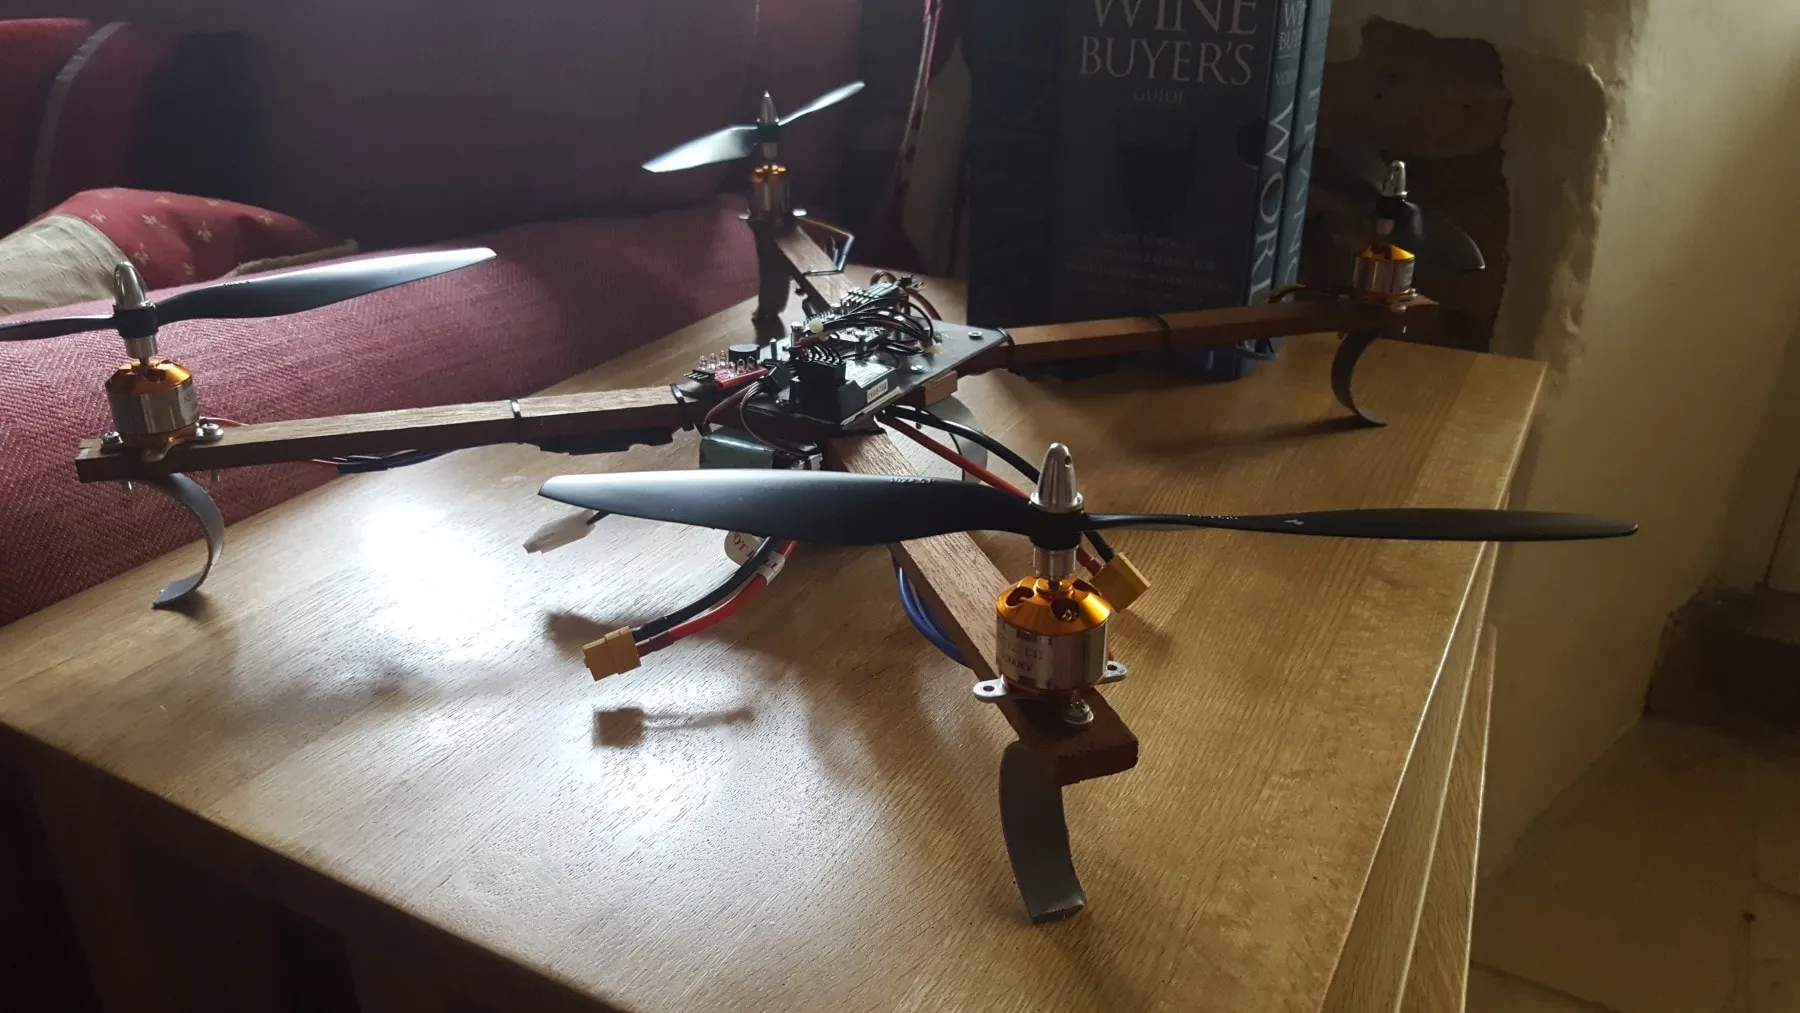 The finished drone